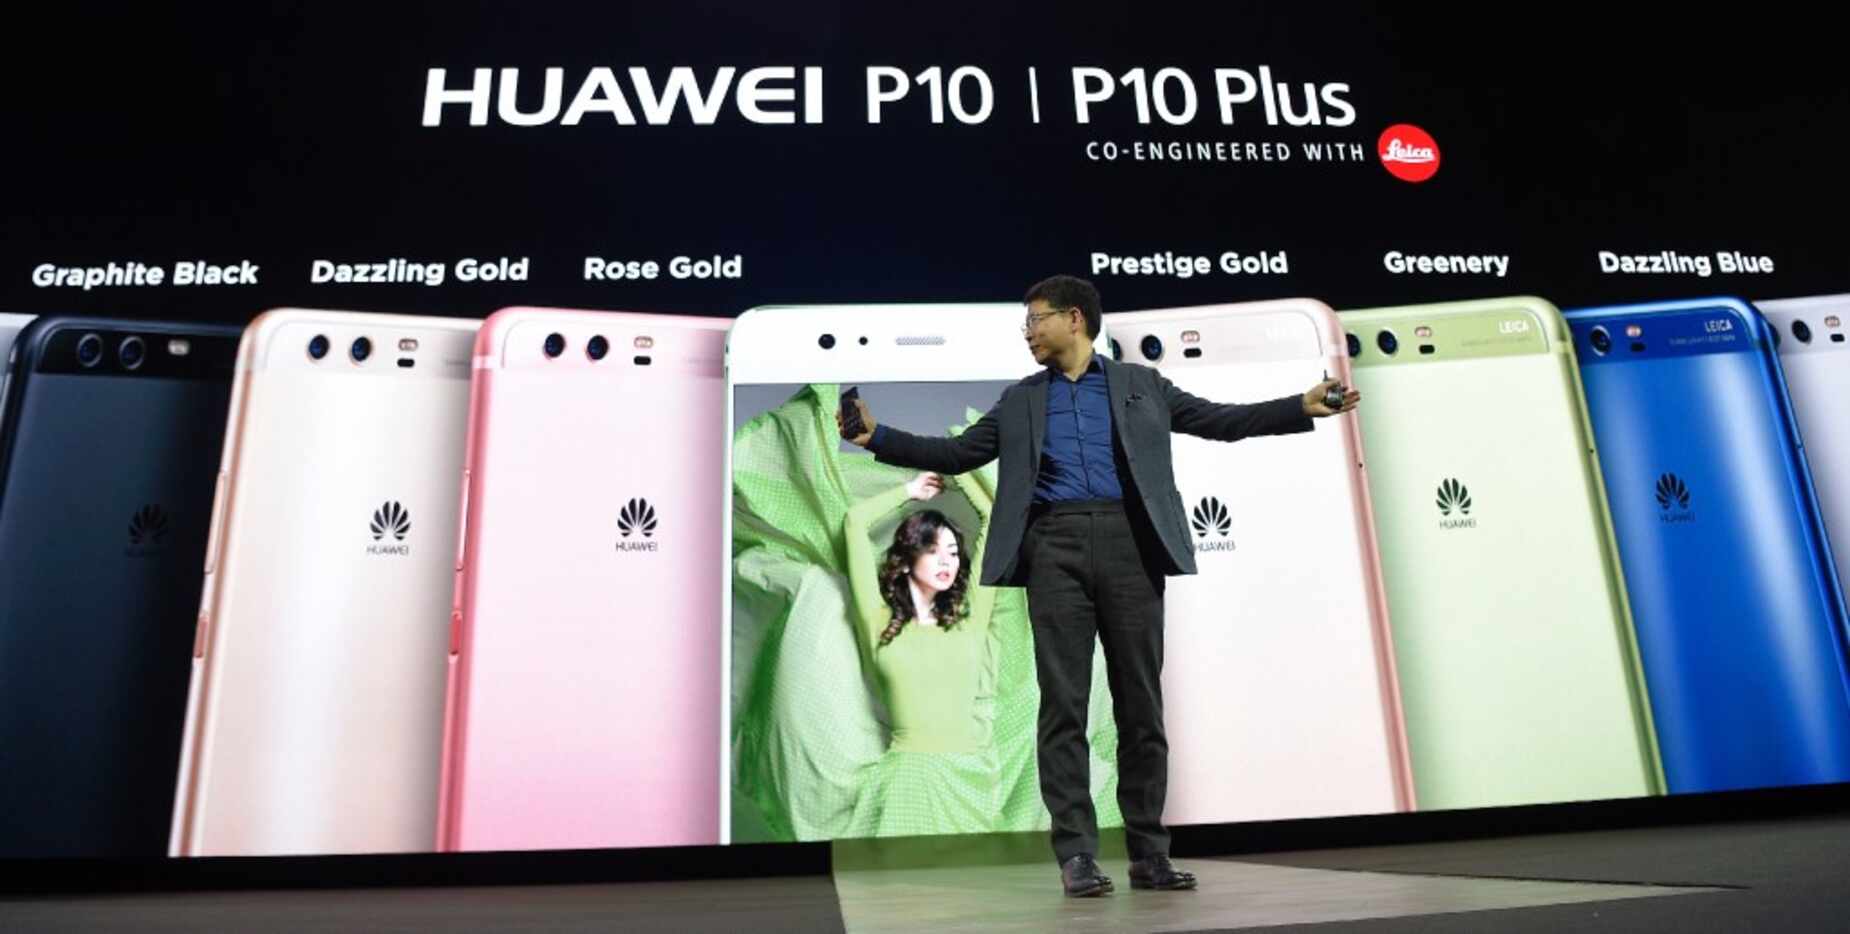 Huawei's CEO Richard Yu presents the new P10 smartphone. (AFP/Getty Images)